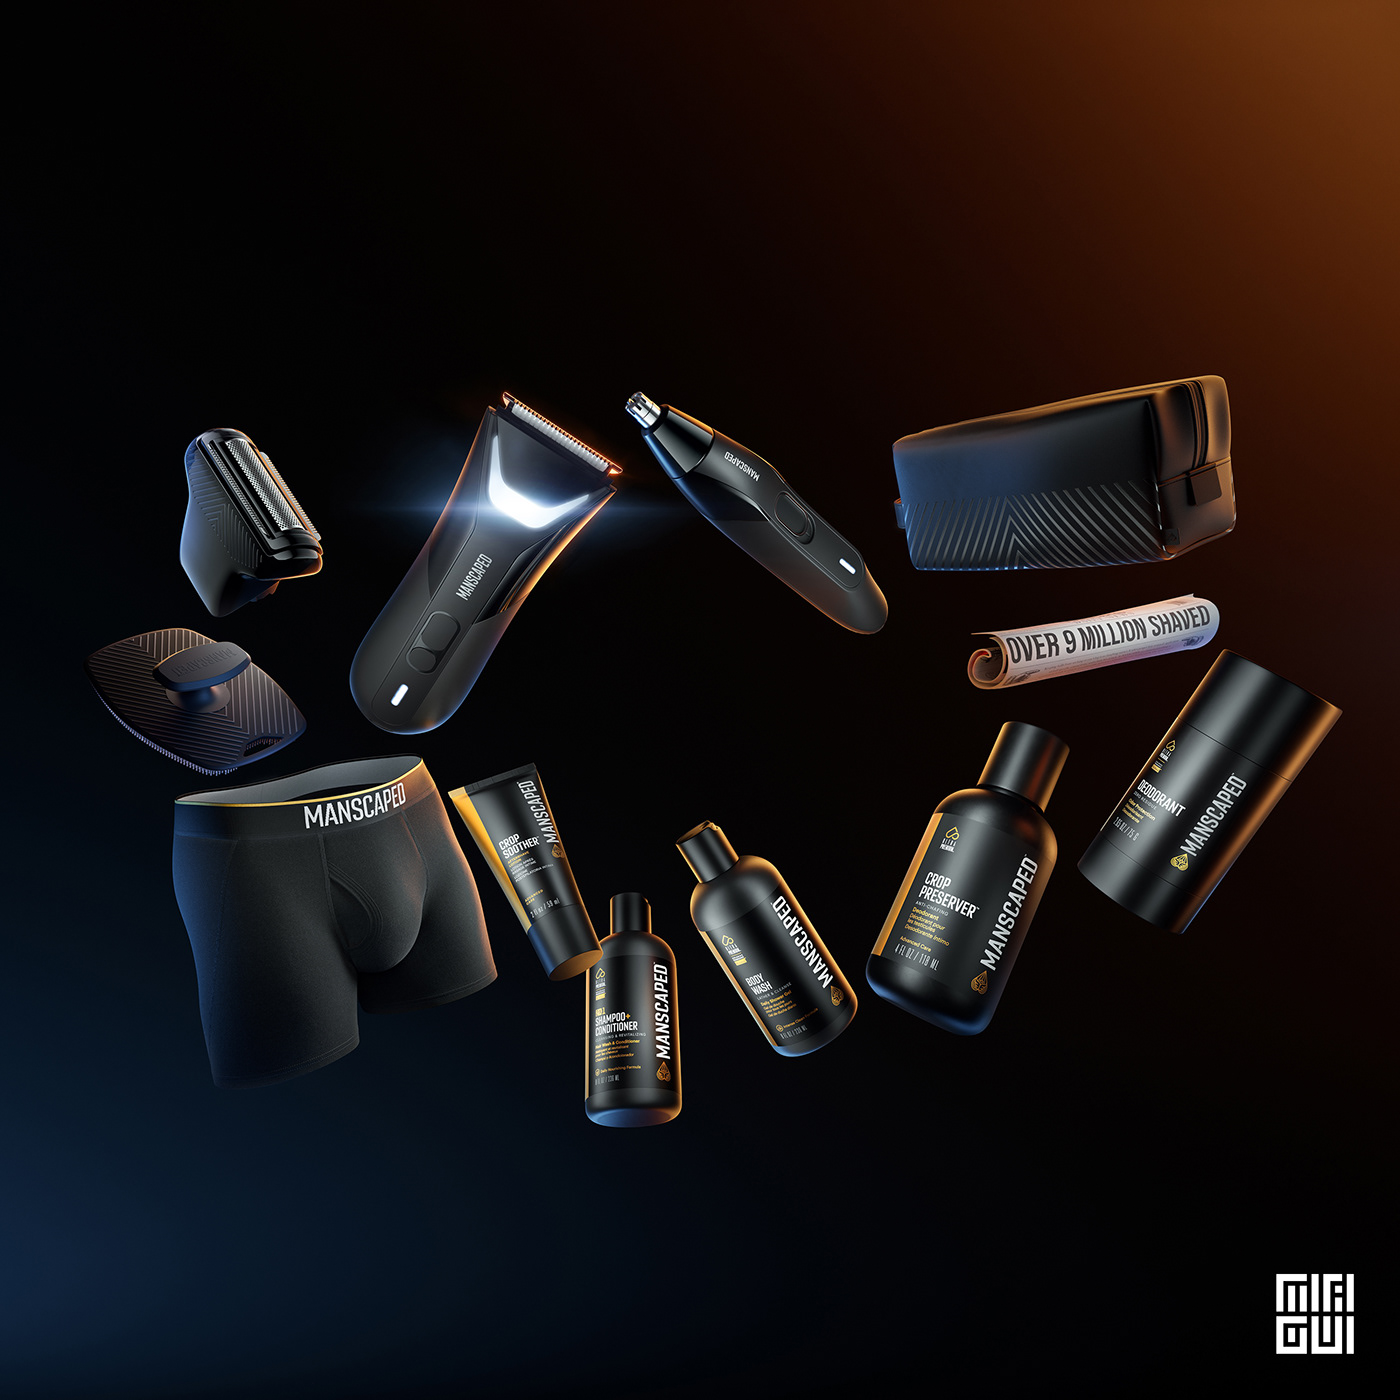 photoshop 3D CGI product design  abstract shaver Digital Art  manscaped Miagui retouch